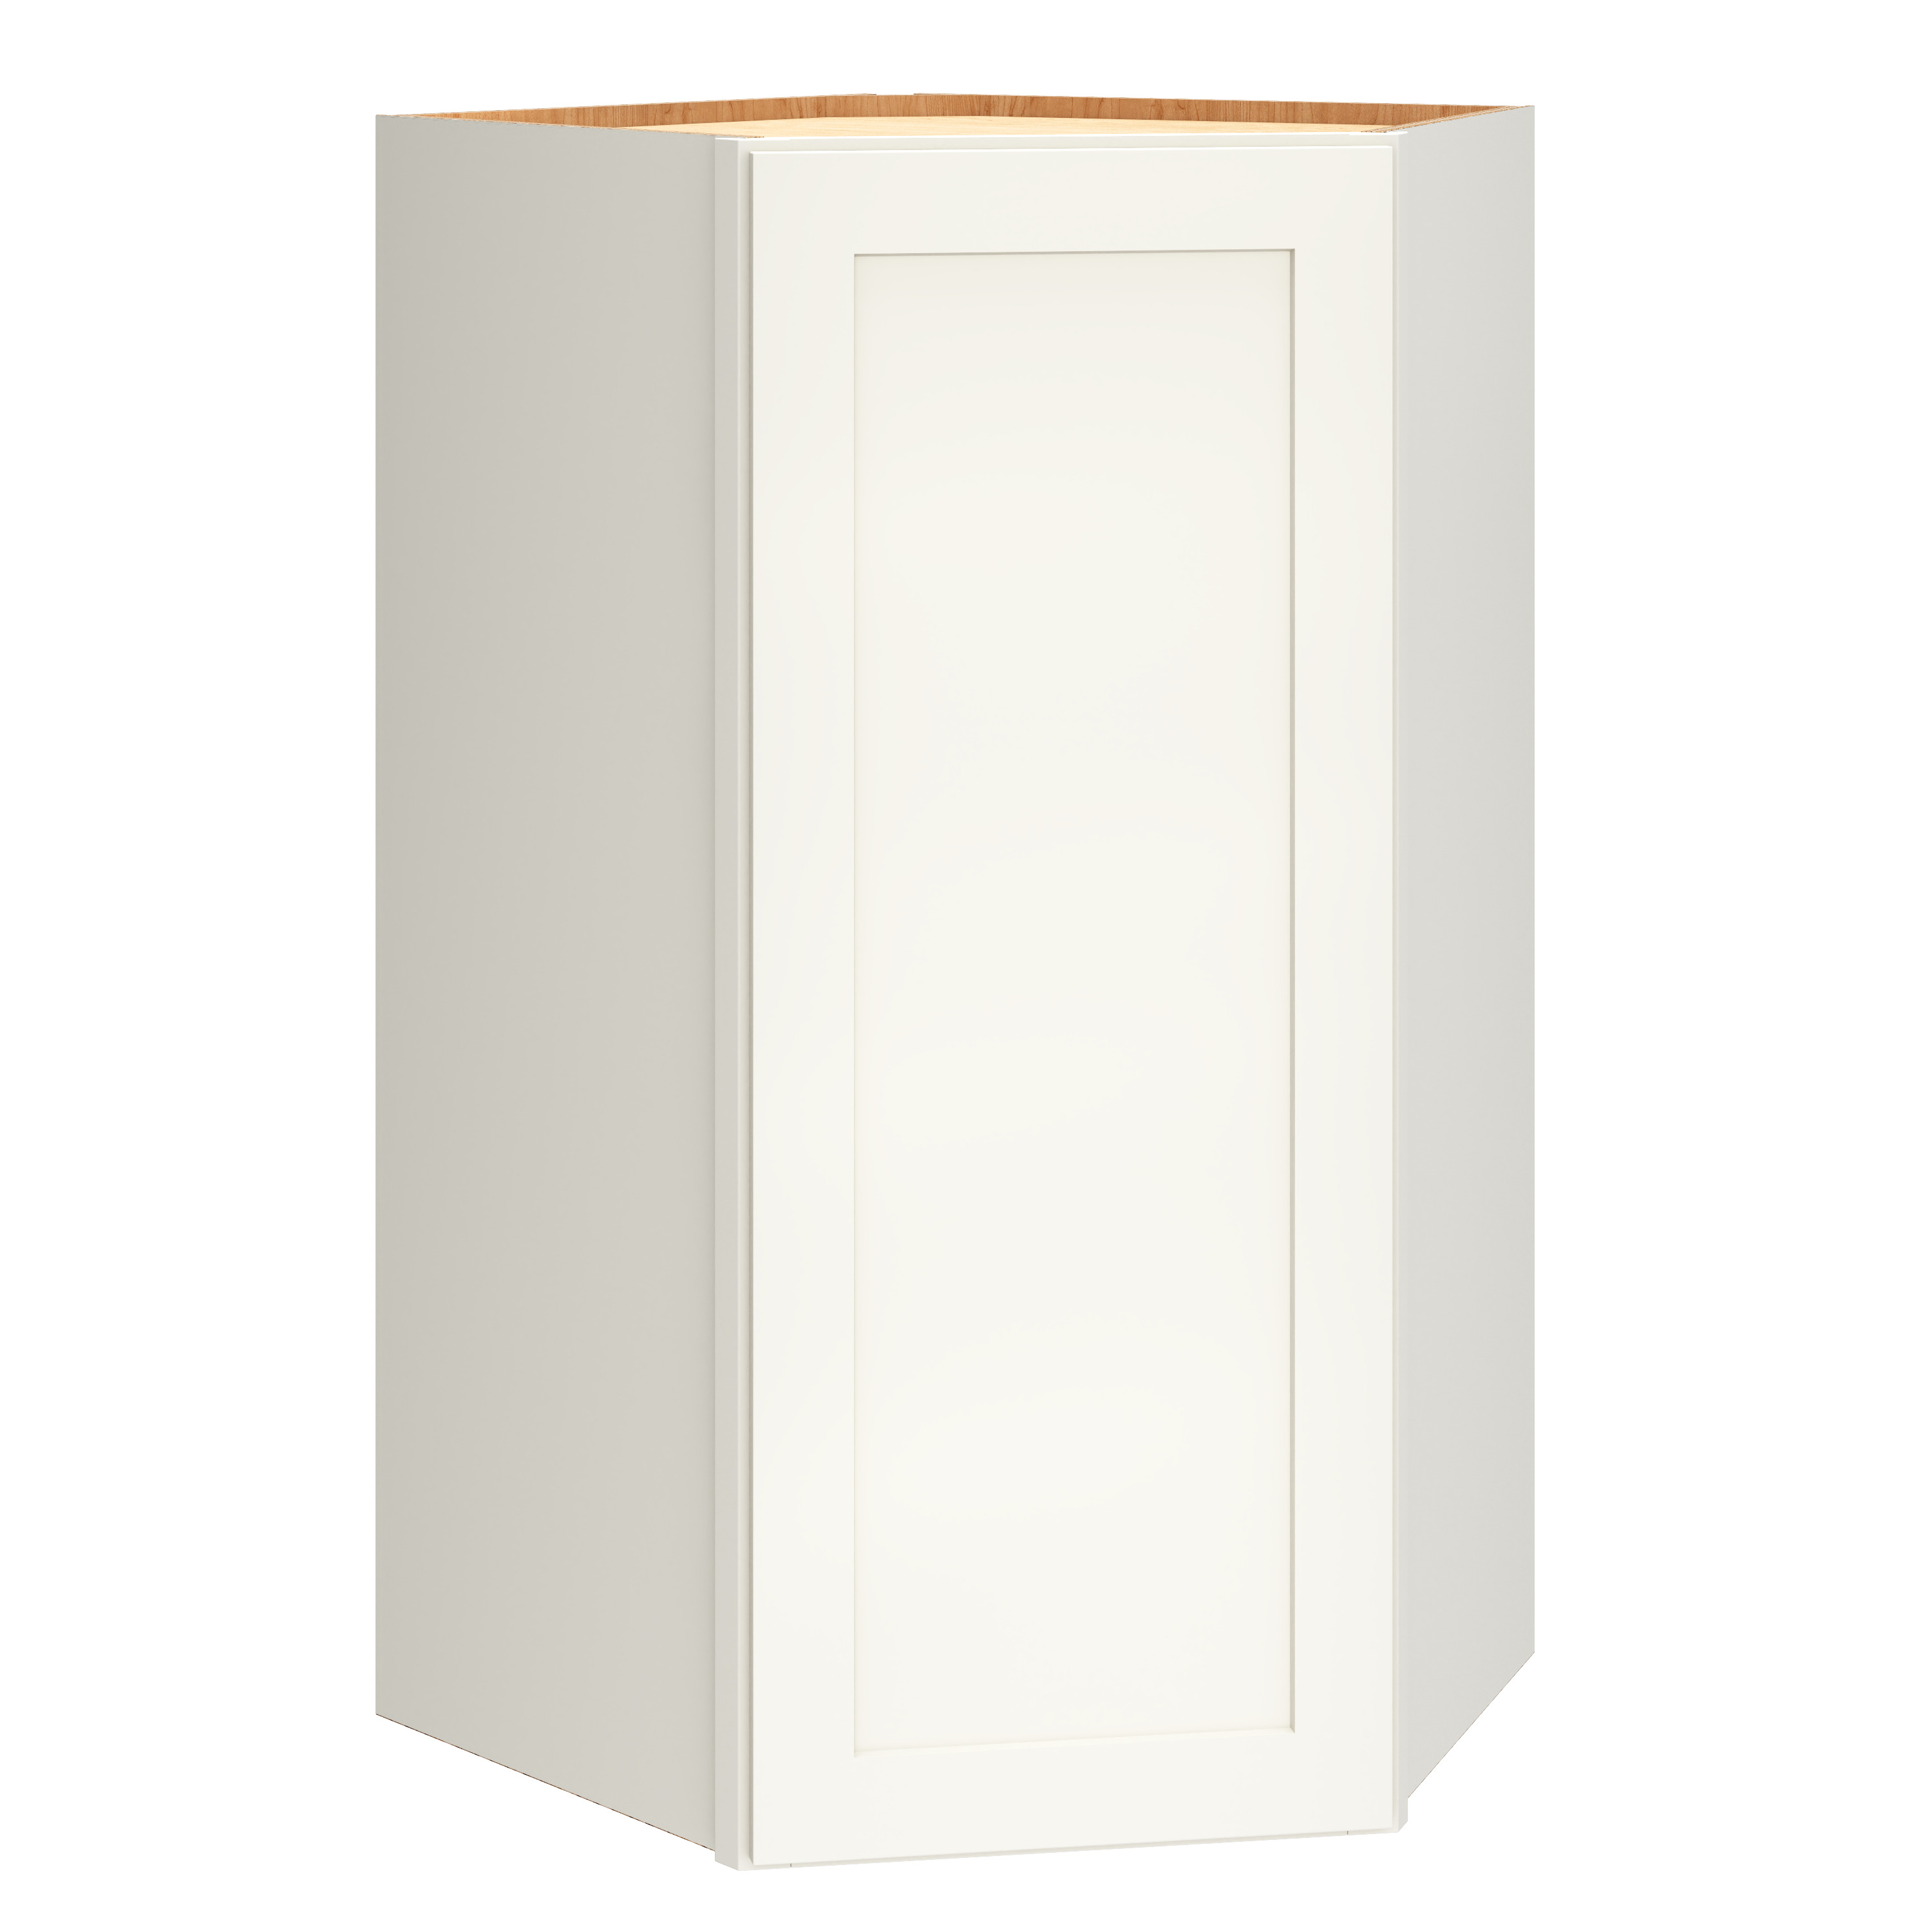 Diagonal Wall Cabinet in Snow